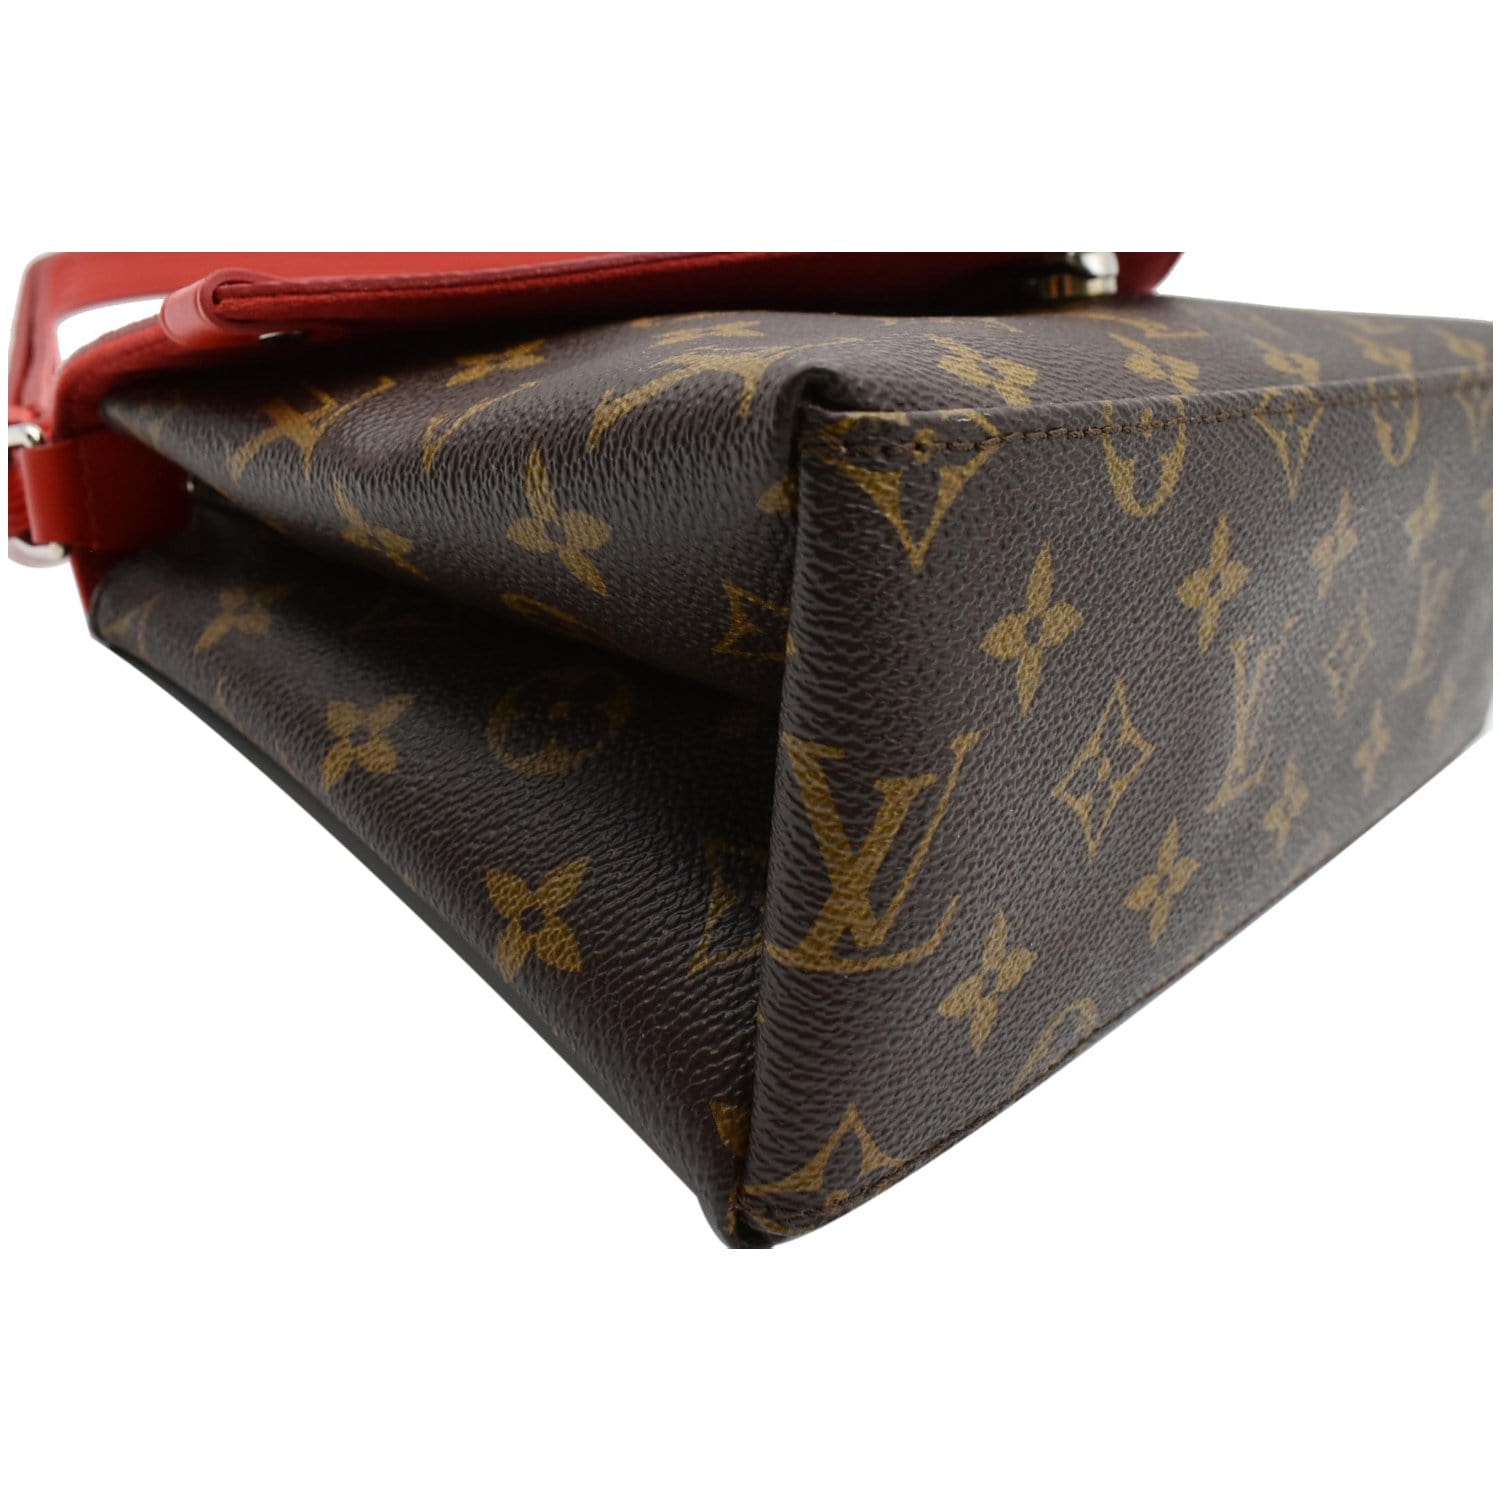 Louis Vuitton Saint Michel Bag Reference Guide - Spotted Fashion